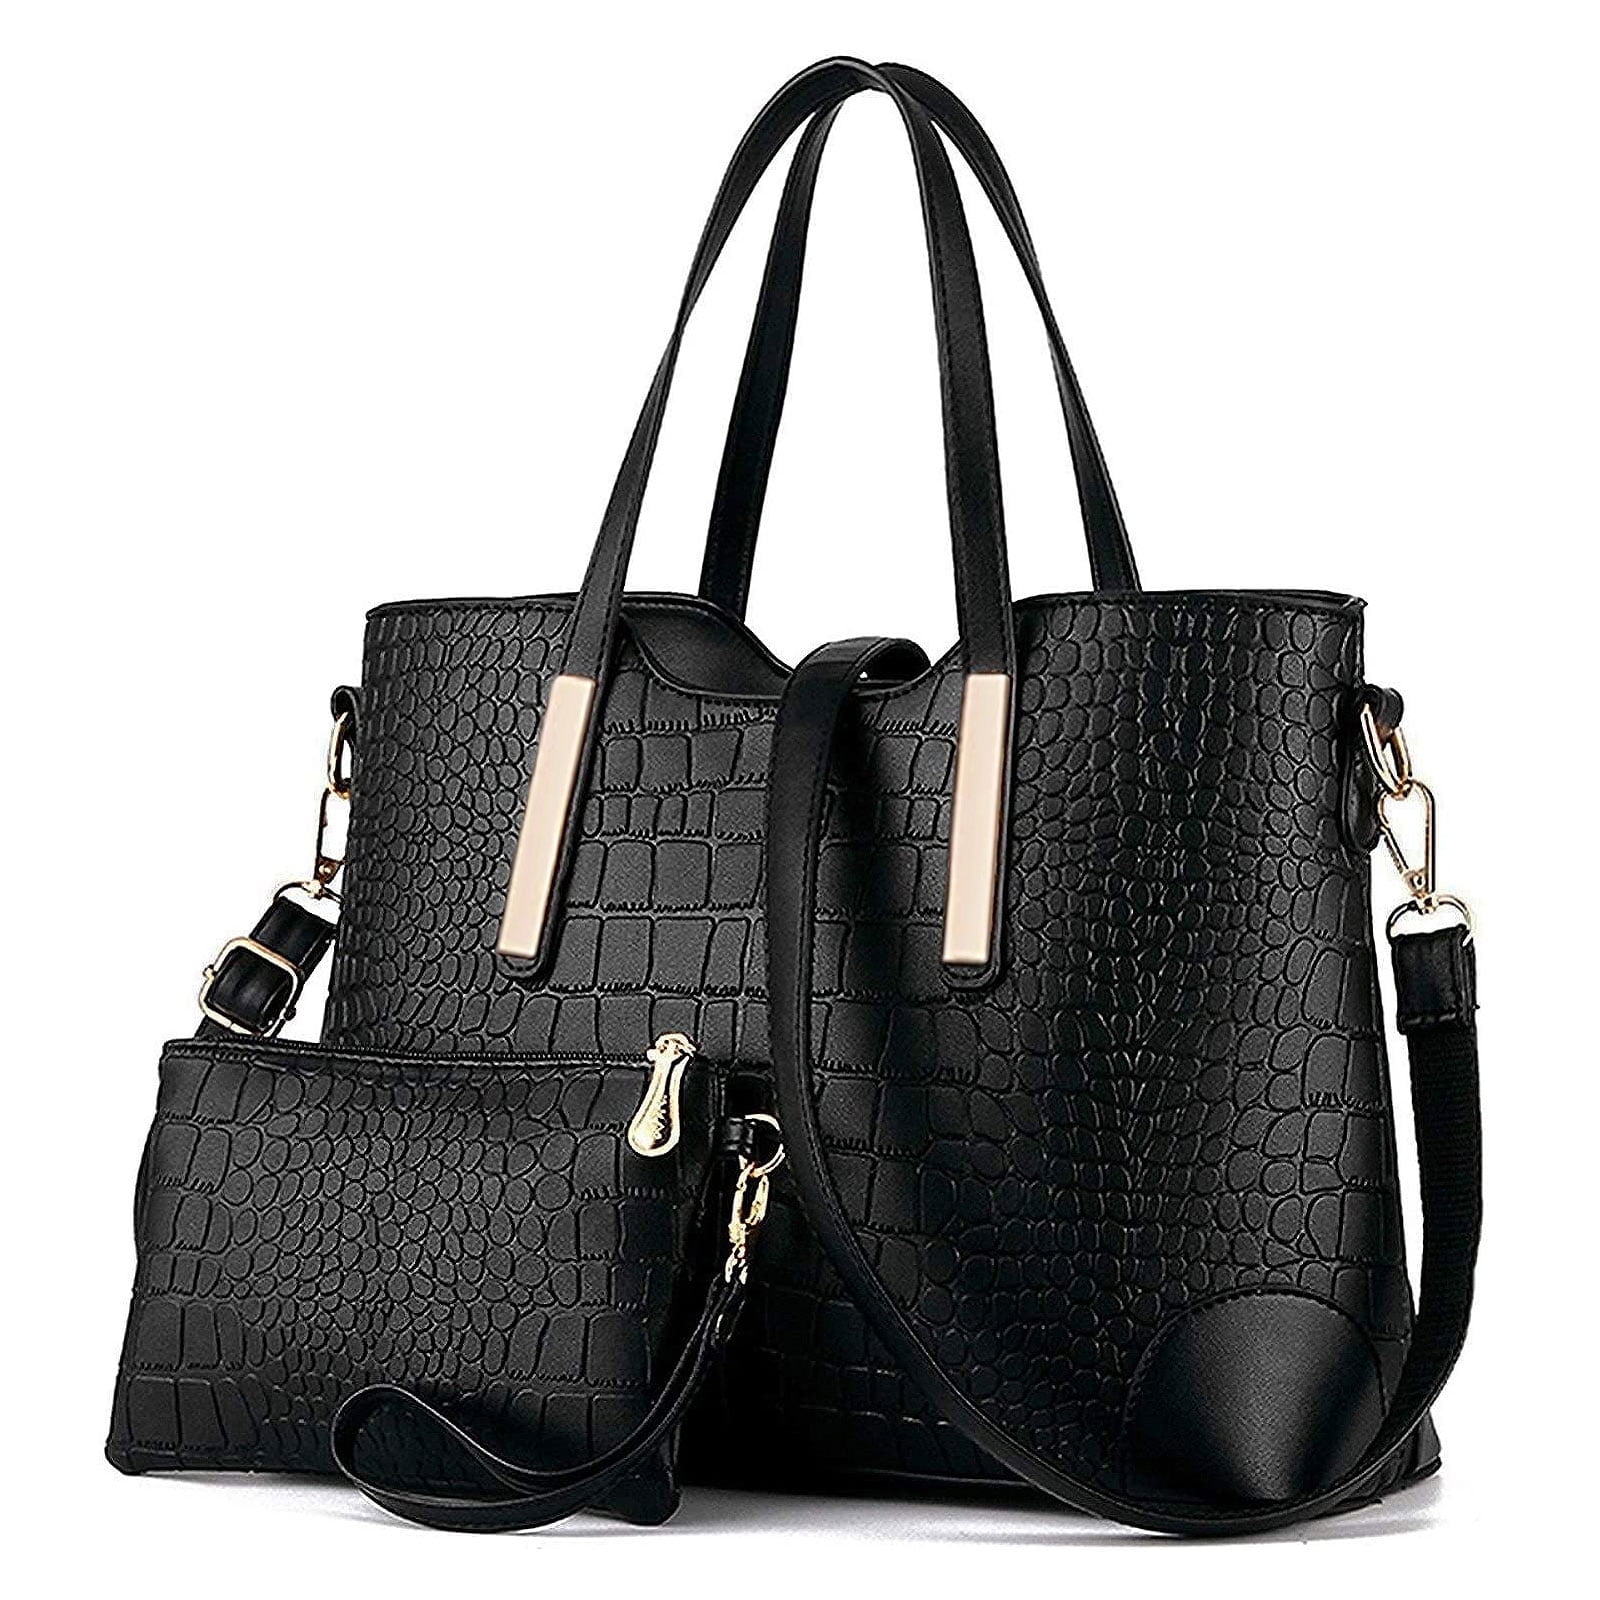 Laptop and Work Bags | Kate Spade Outlet